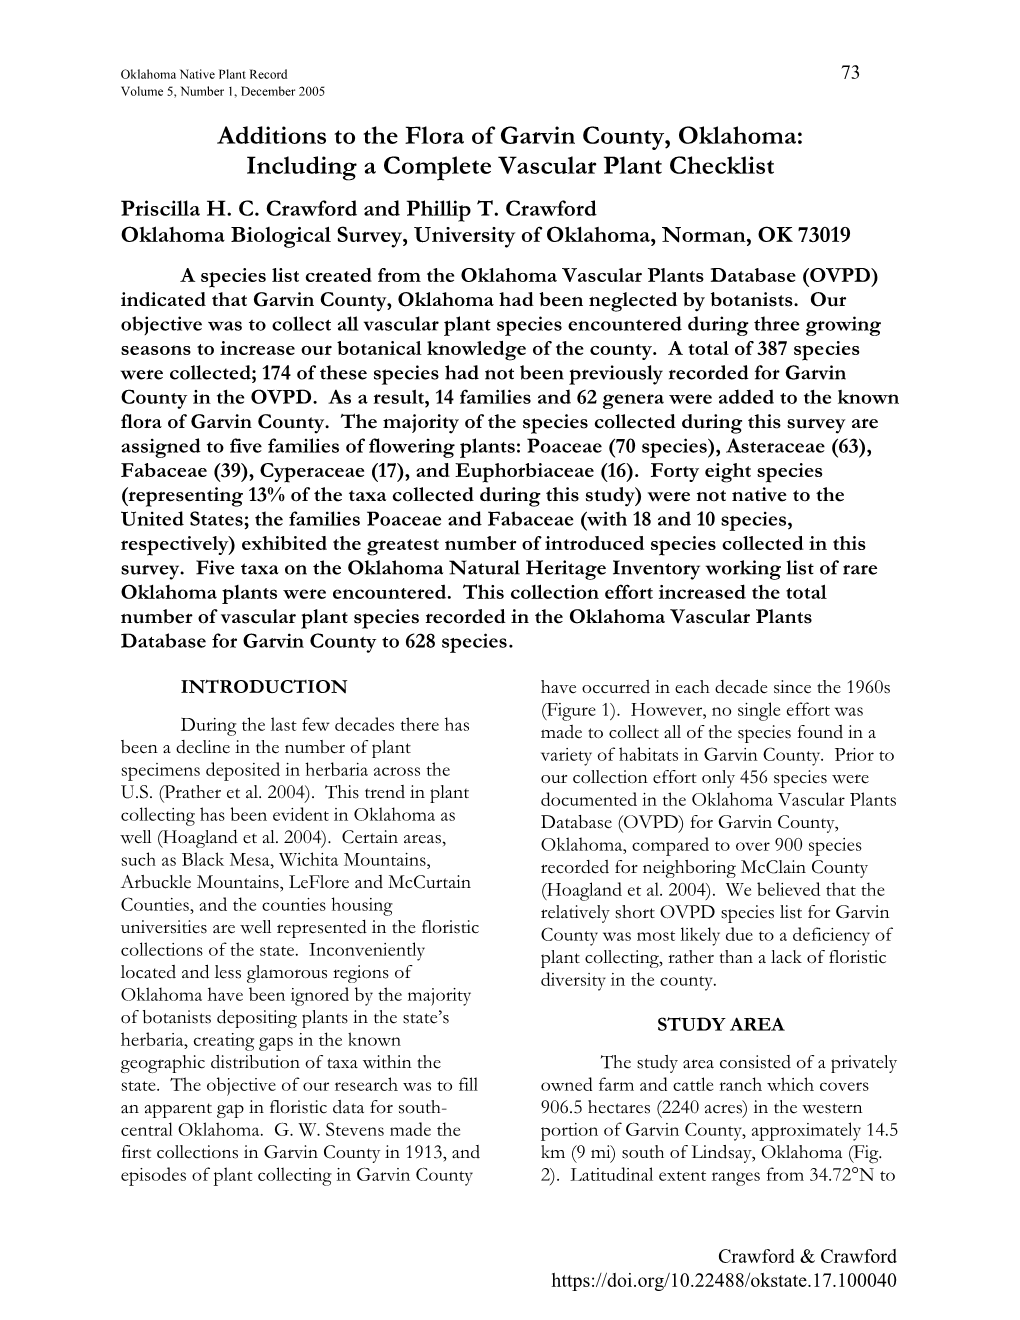 Journal of the Oklahoma Native Plant Society, Volume 5, Number 1